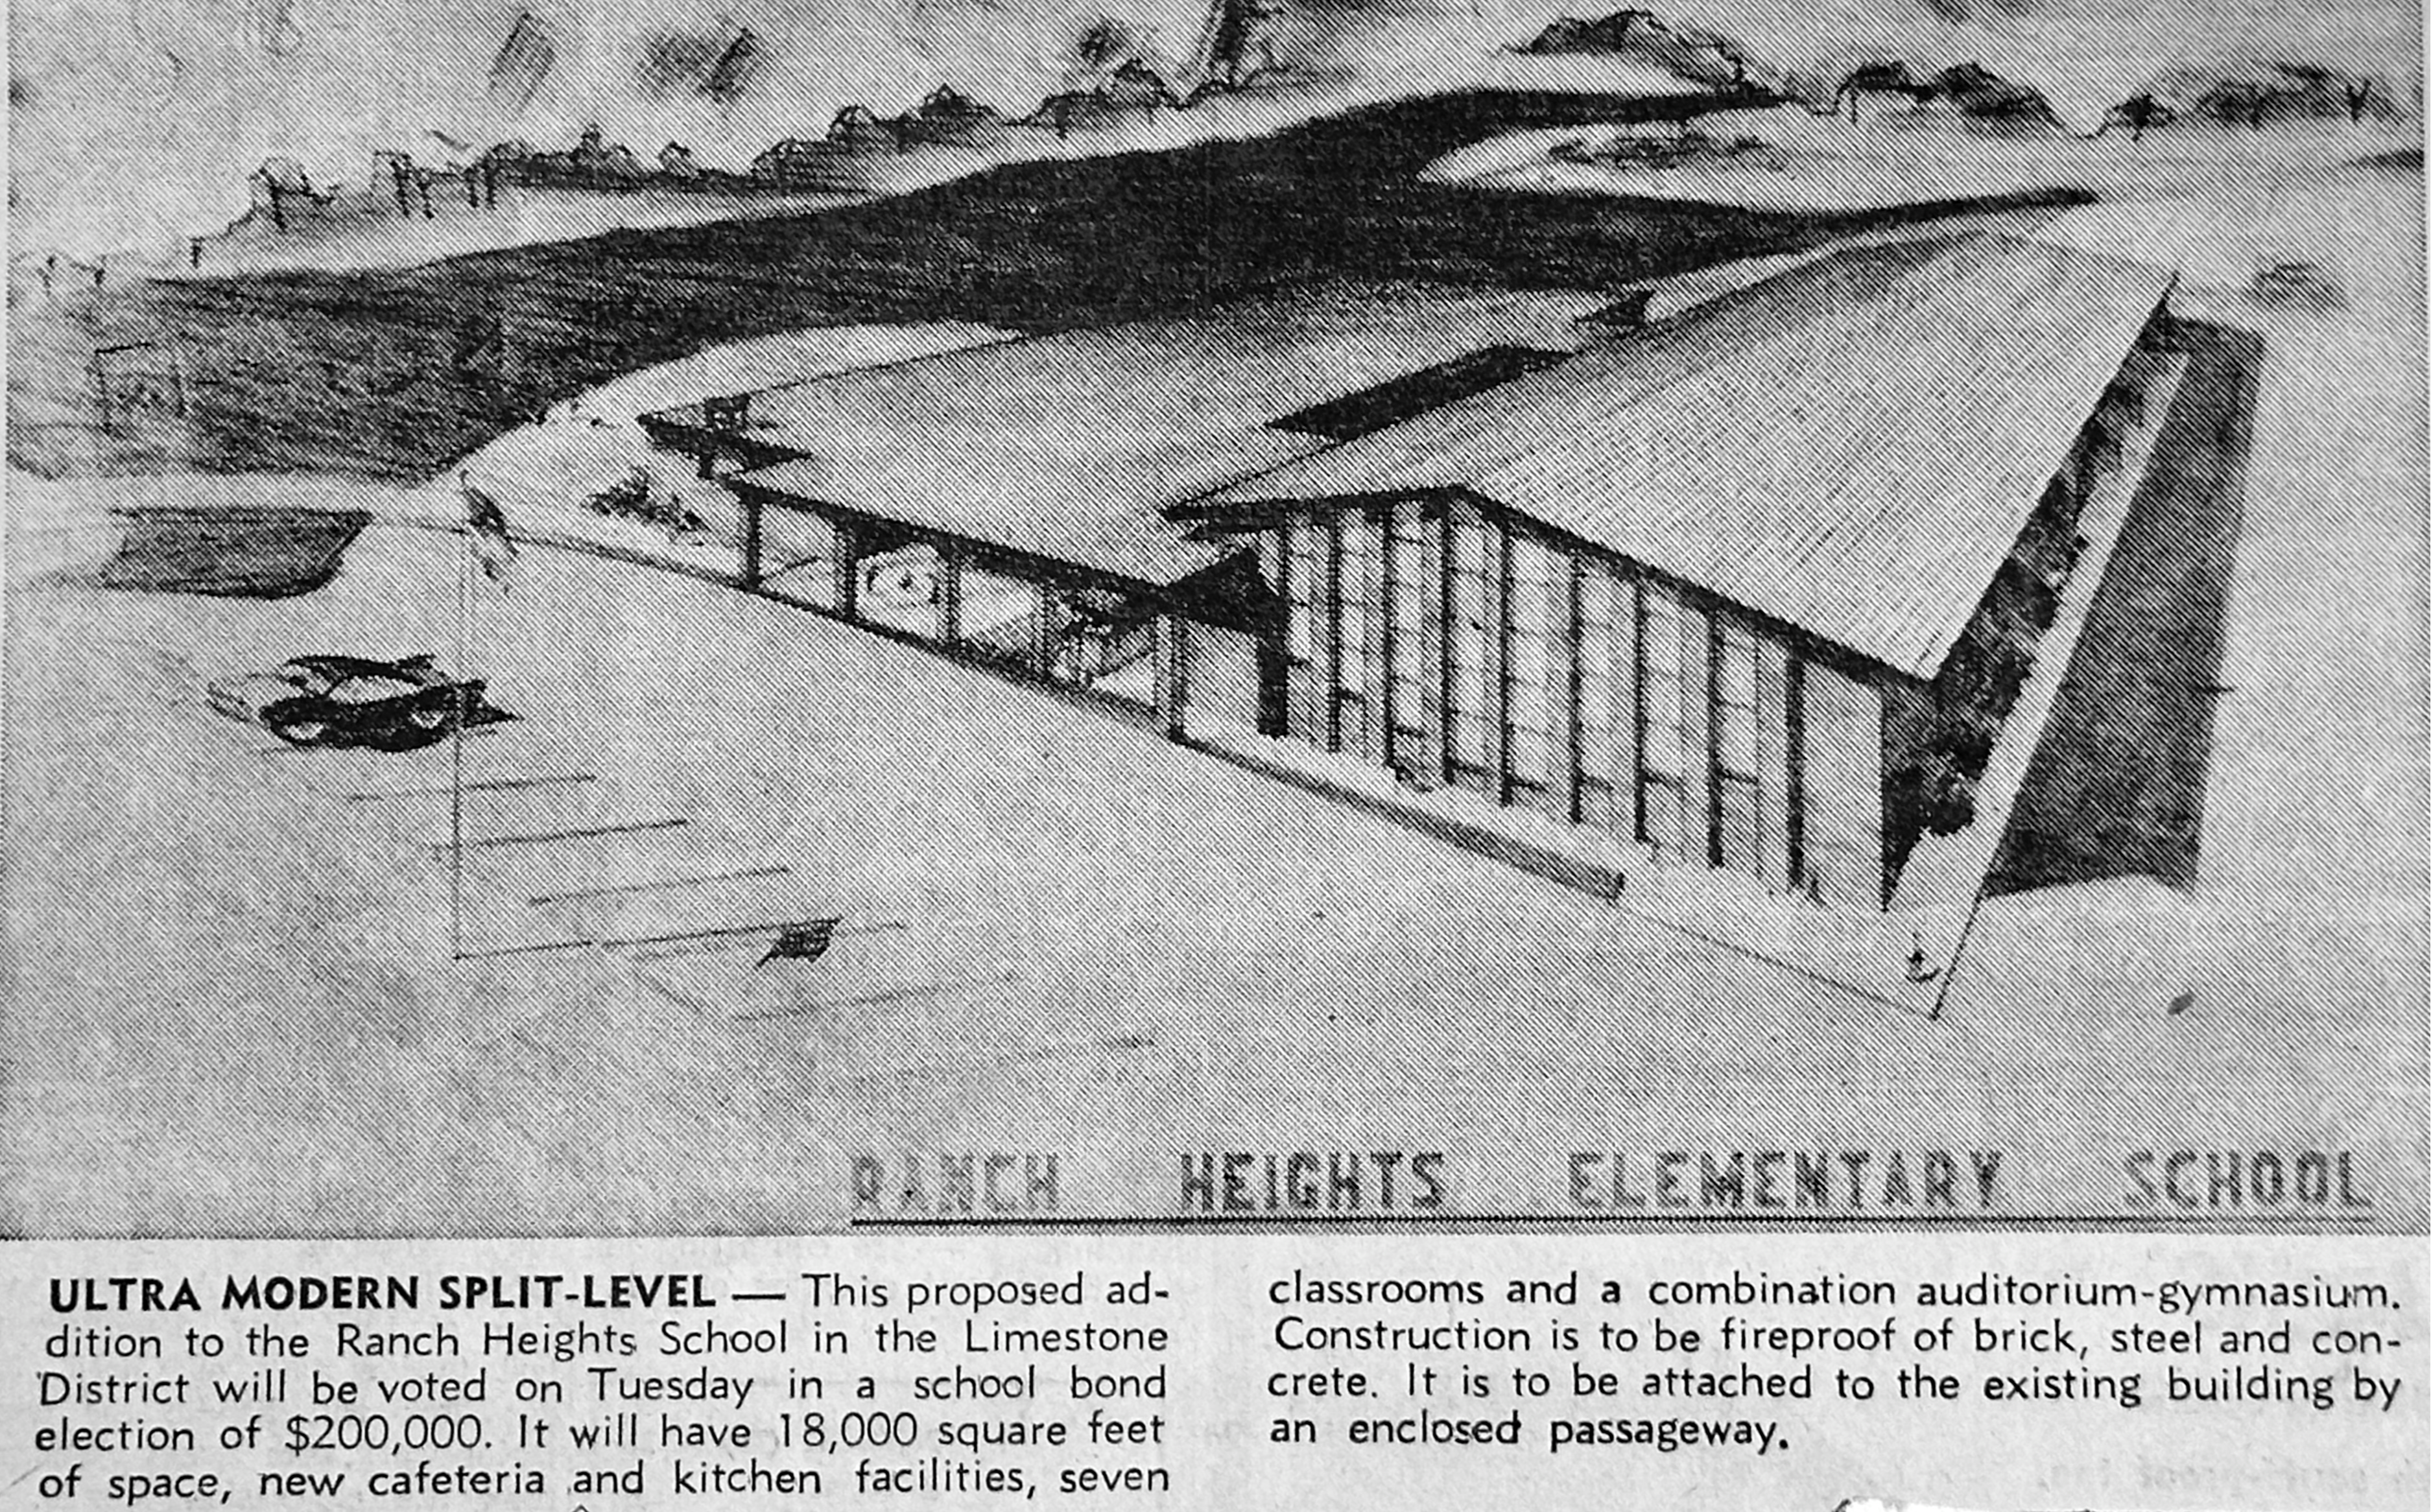 Article about 1961 addition